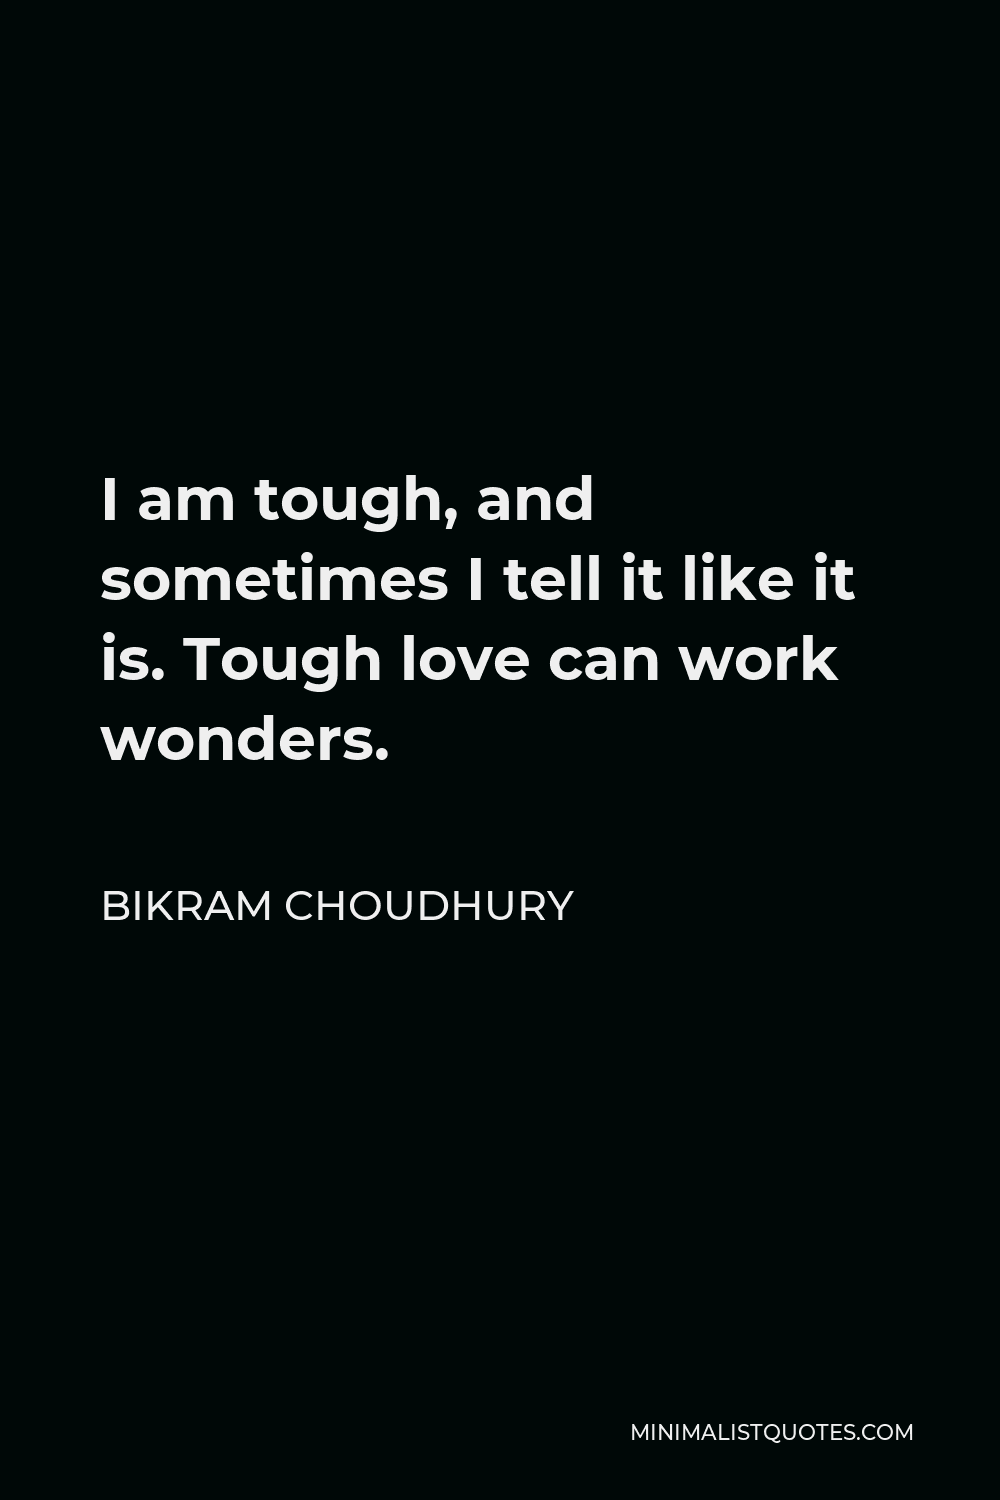 Bikram Choudhury Quote - I am tough, and sometimes I tell it like it is. Tough love can work wonders.